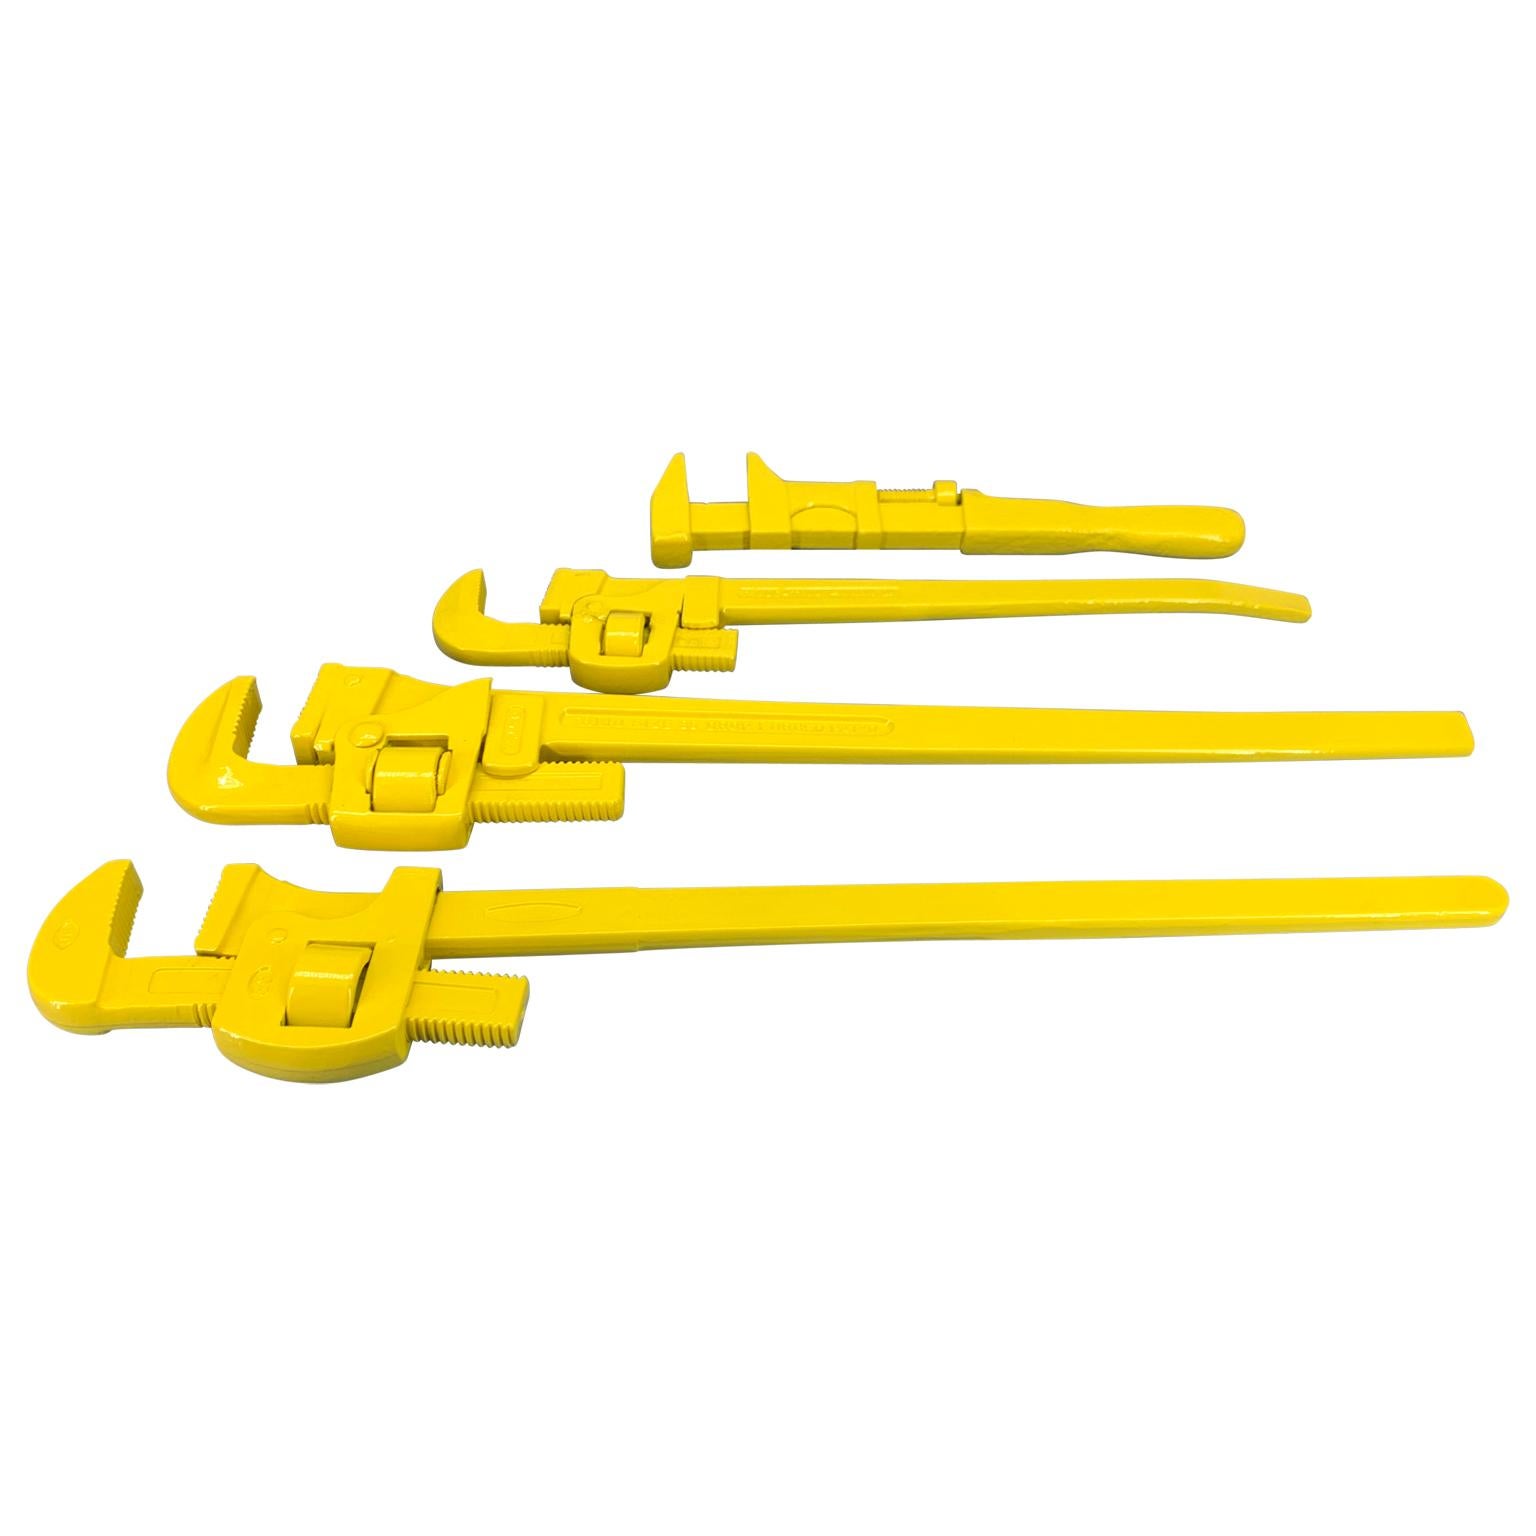 large industrial wrenches